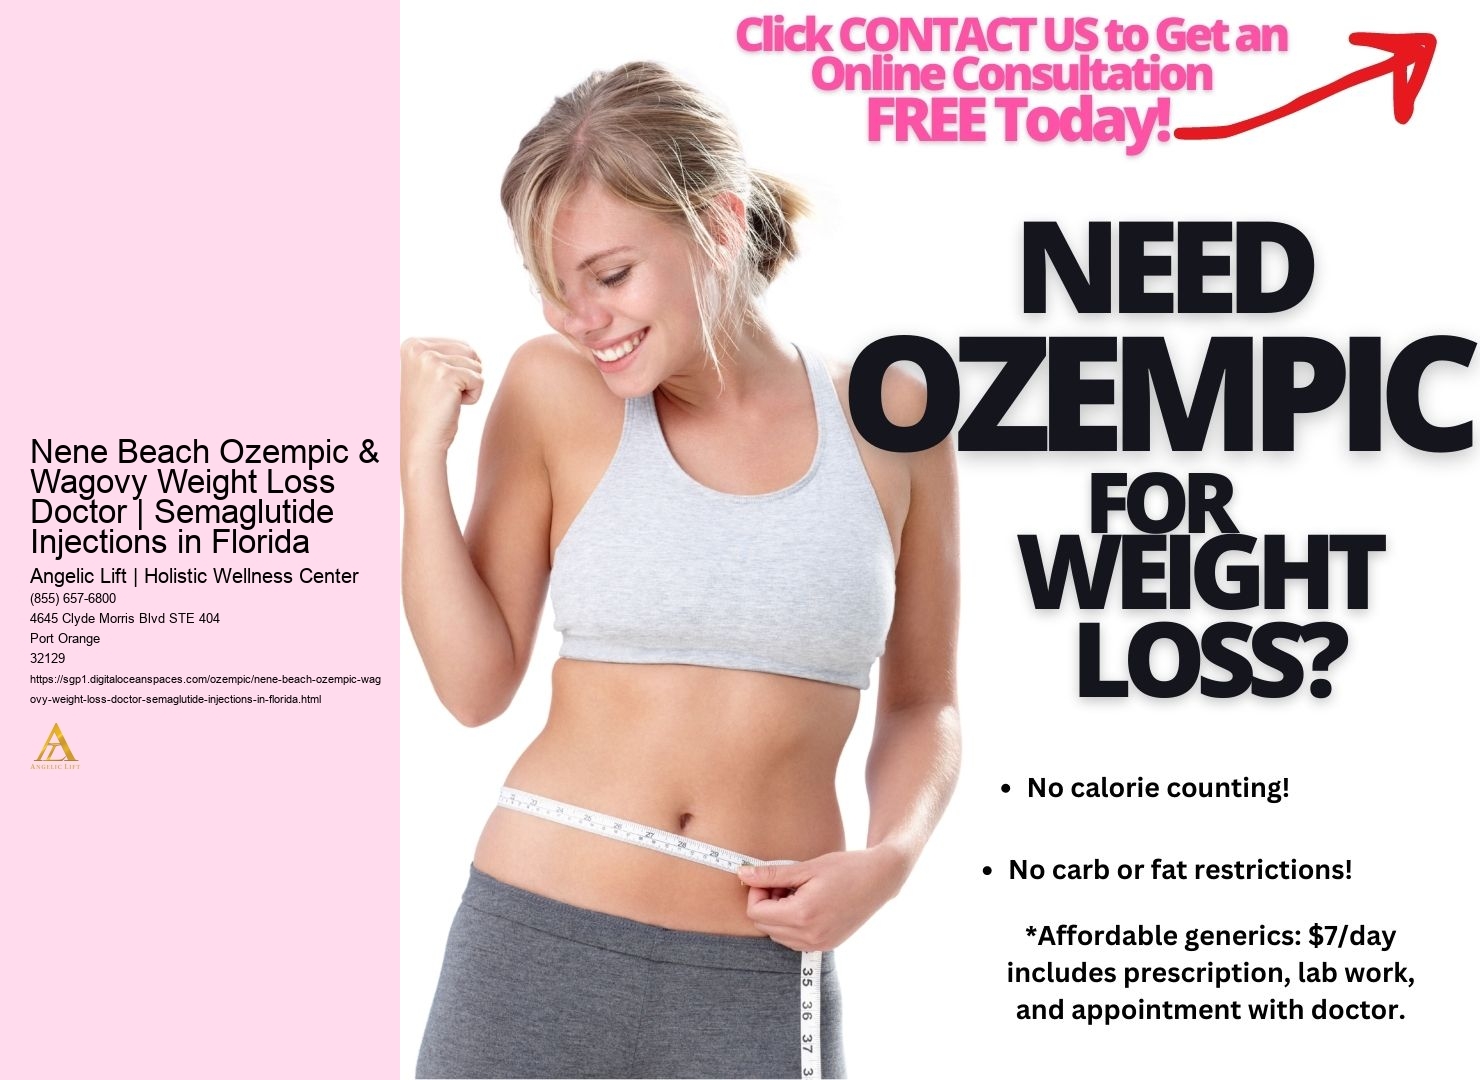 Nene Beach Ozempic & Wagovy Weight Loss Doctor | Semaglutide Injections in Florida